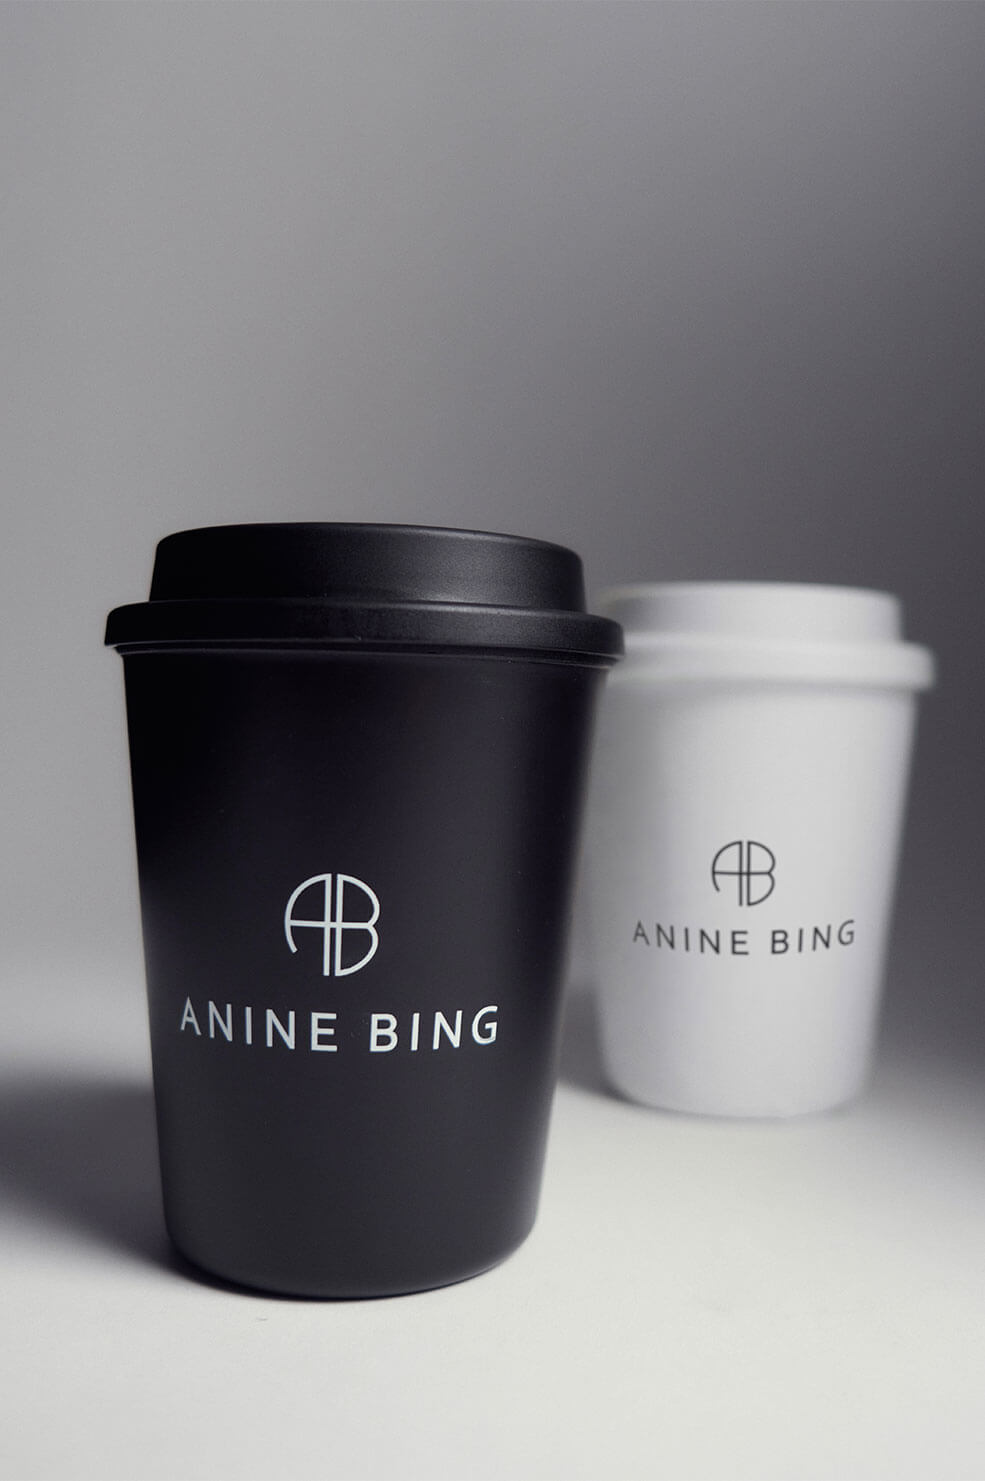 ANINE BING AB Cup 2 Pack - White And Black - Second Front View Both